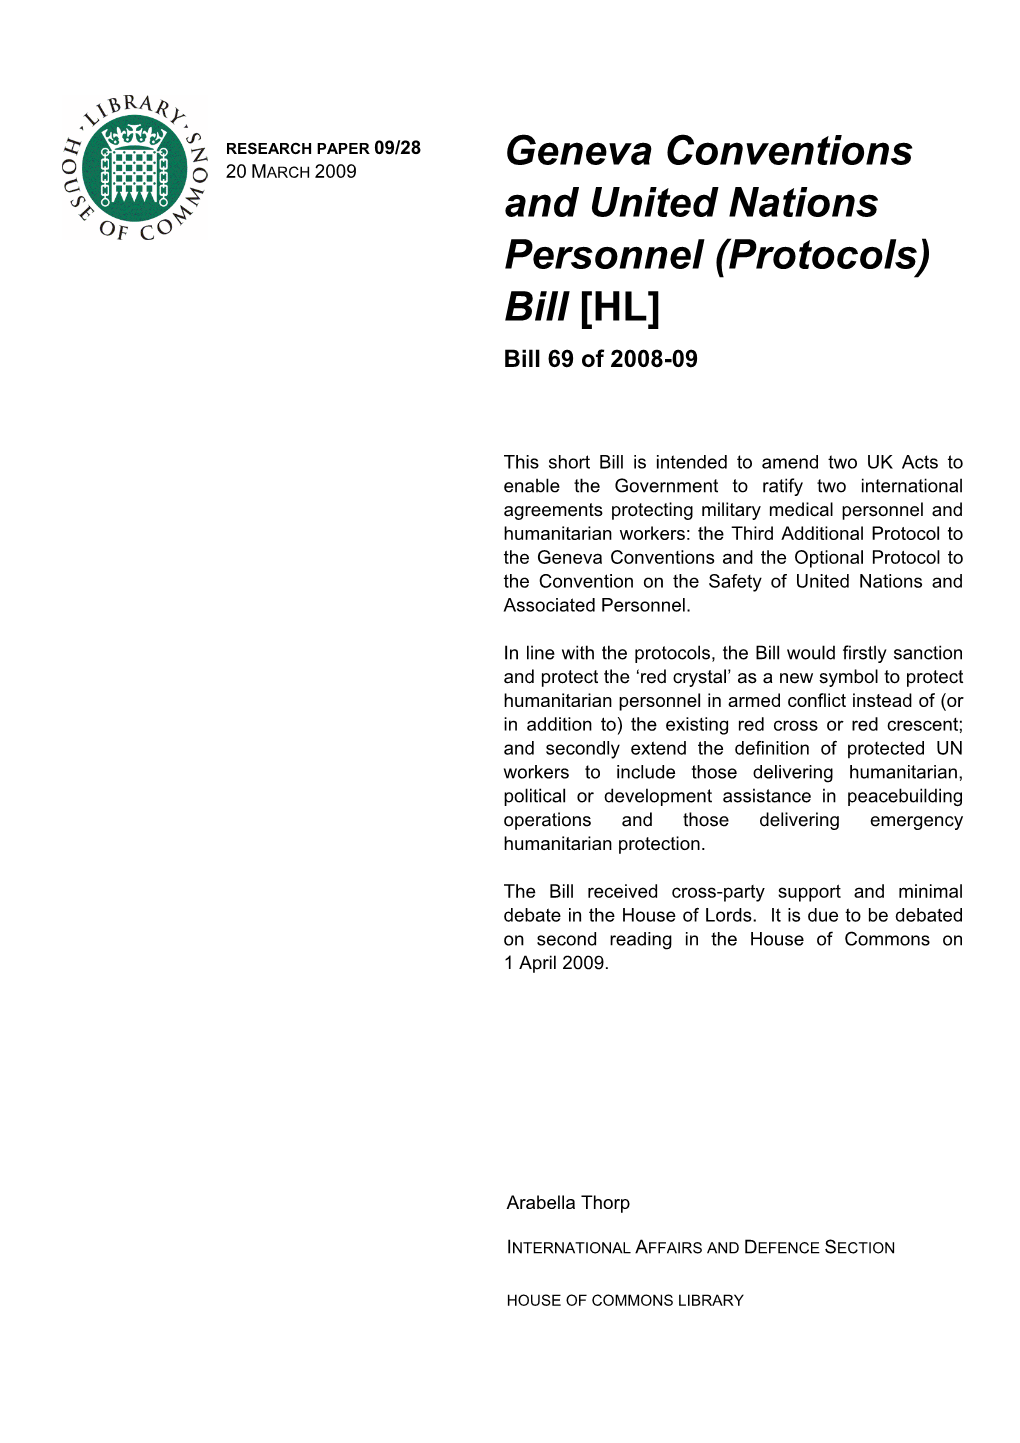 Geneva Conventions and United Nations Personnel (Protocols) Bill